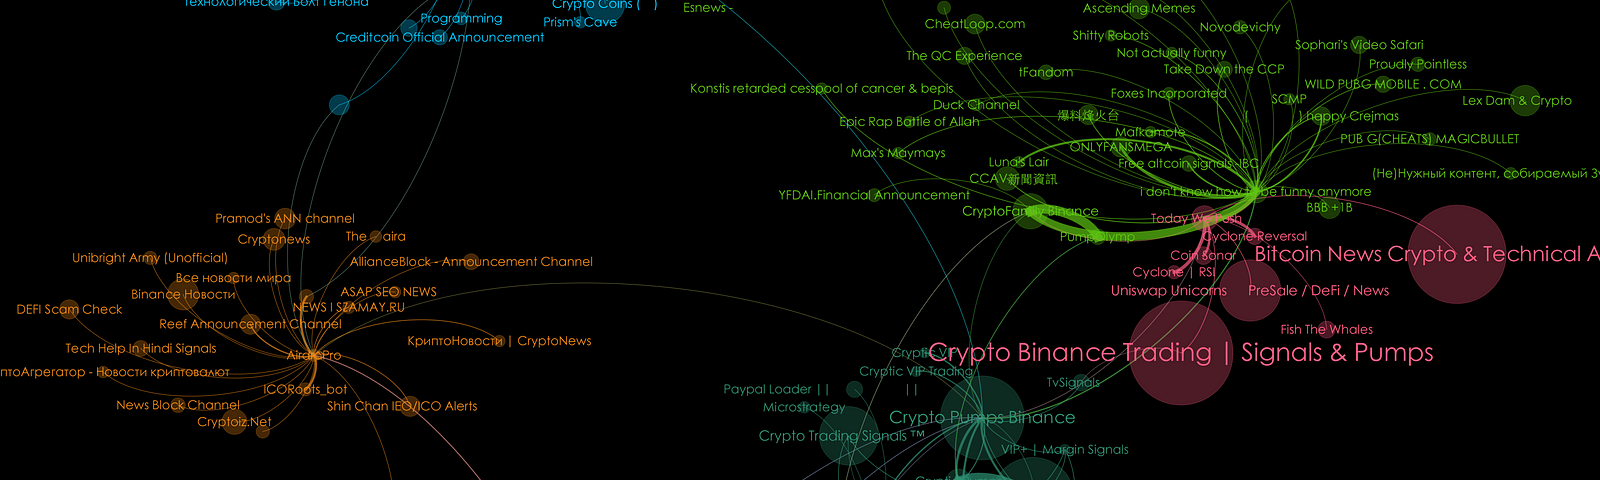 Graph network showing Telegram channels that are of interest to cryptocurrencies pump-and-dump groups